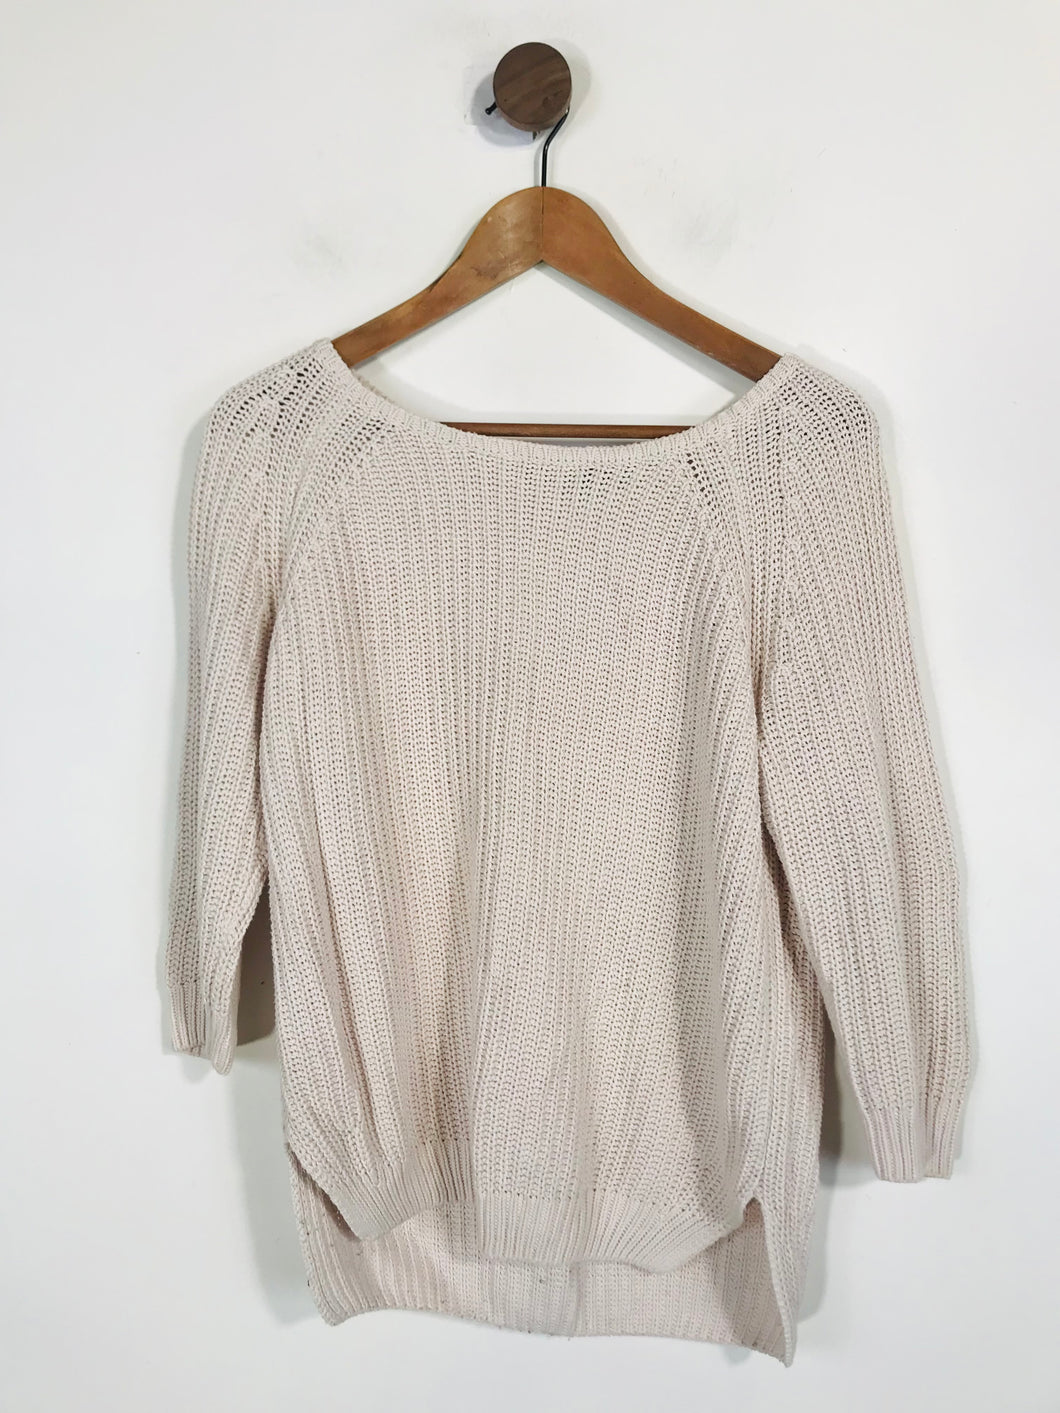 French Connection Women's Jumper | XS UK6-8 | Beige